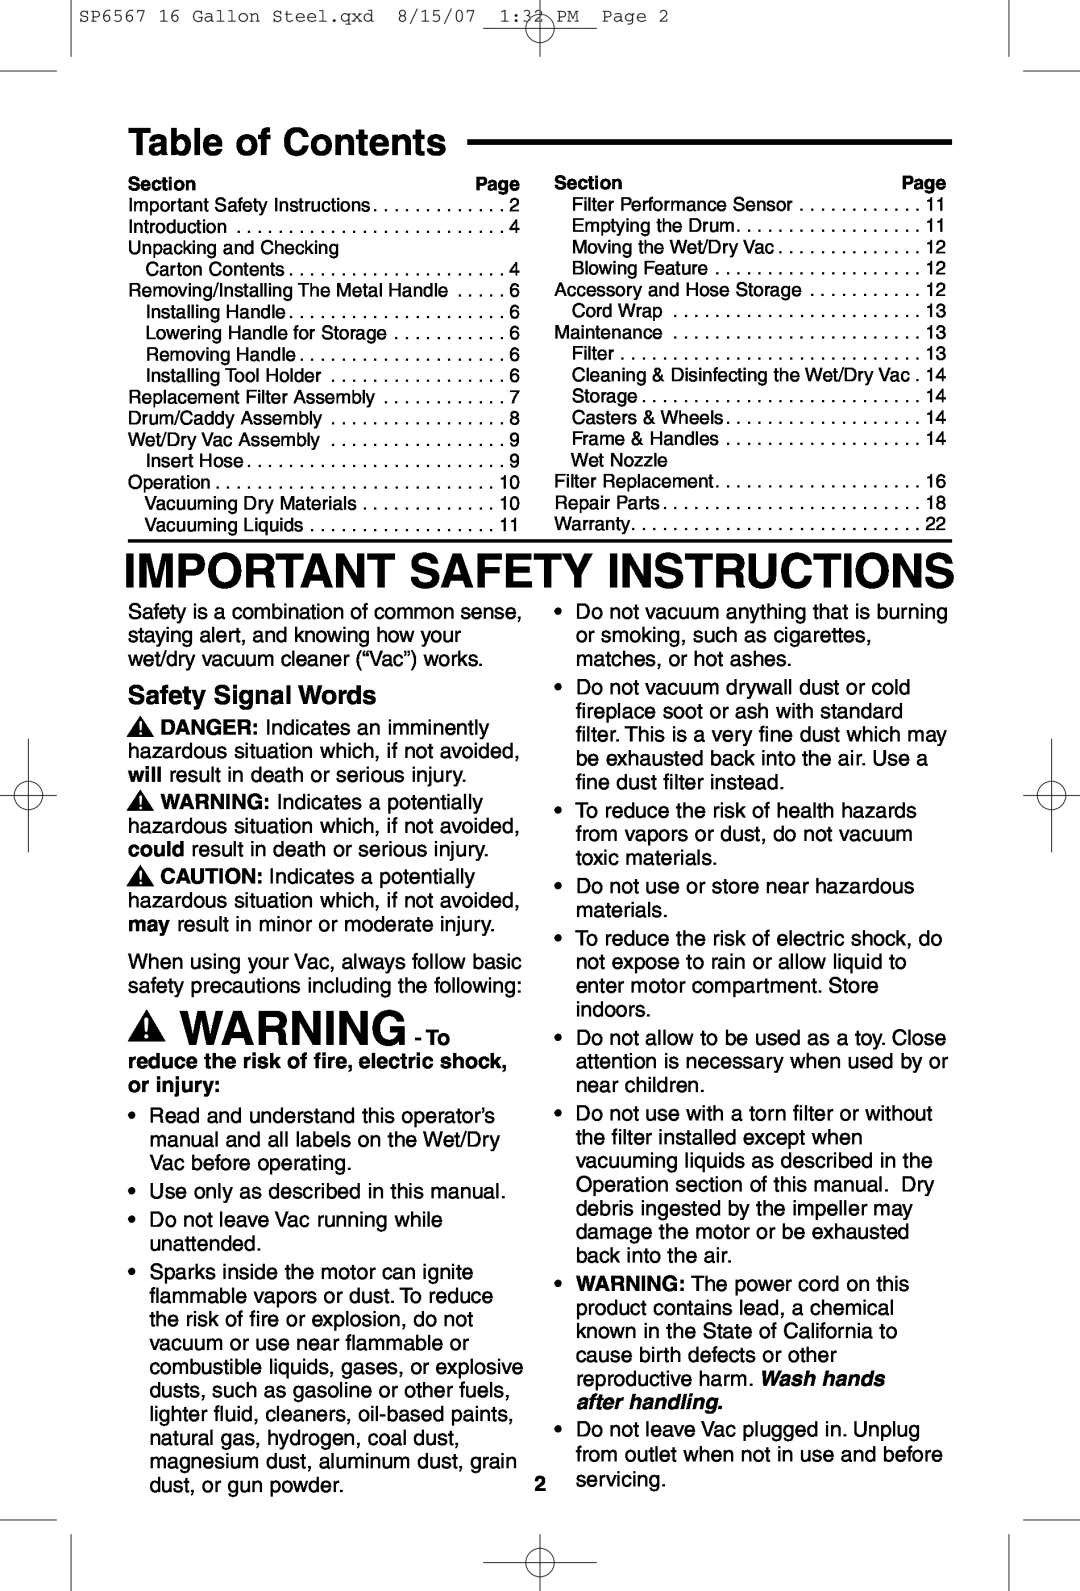 RIDGID WD1950 manual Important Safety Instructions, WARNING - To, Table of Contents, Safety Signal Words 